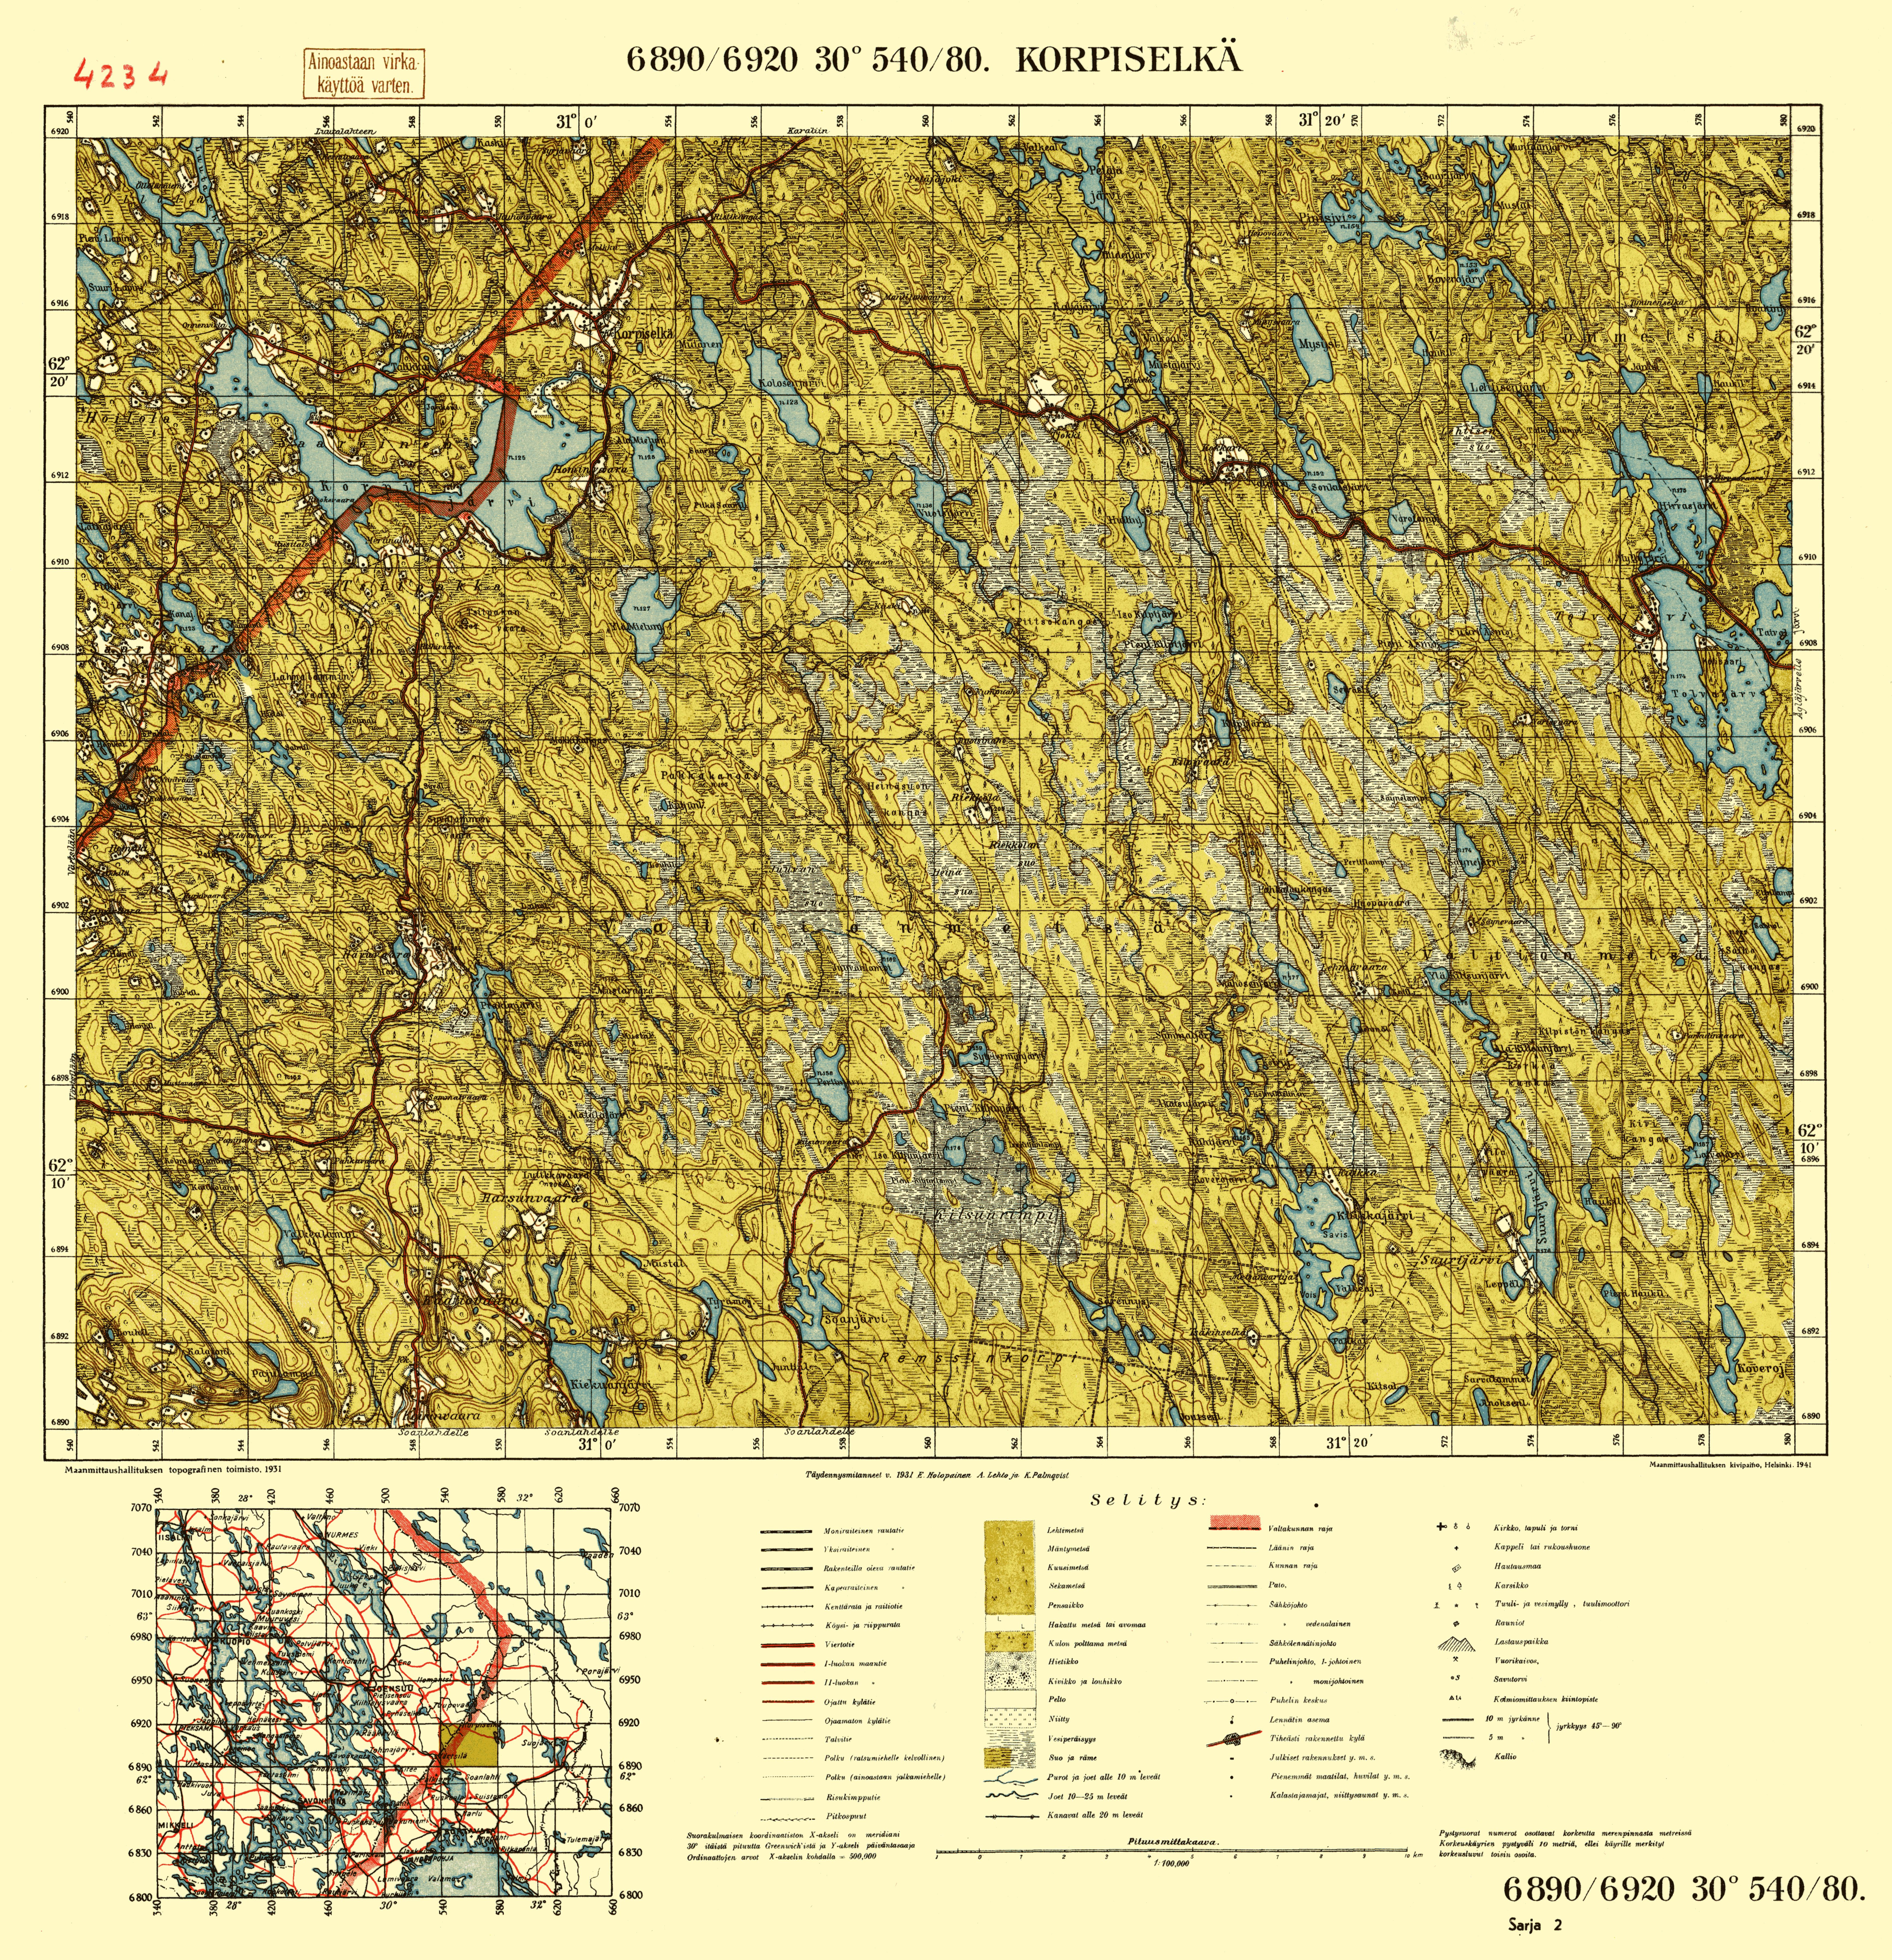 Korpiselkja. Korpiselkä. Topografikartta 4234. Topographic map from 1941. Use the zooming tool to explore in higher level of detail. Obtain as a quality print or high resolution image